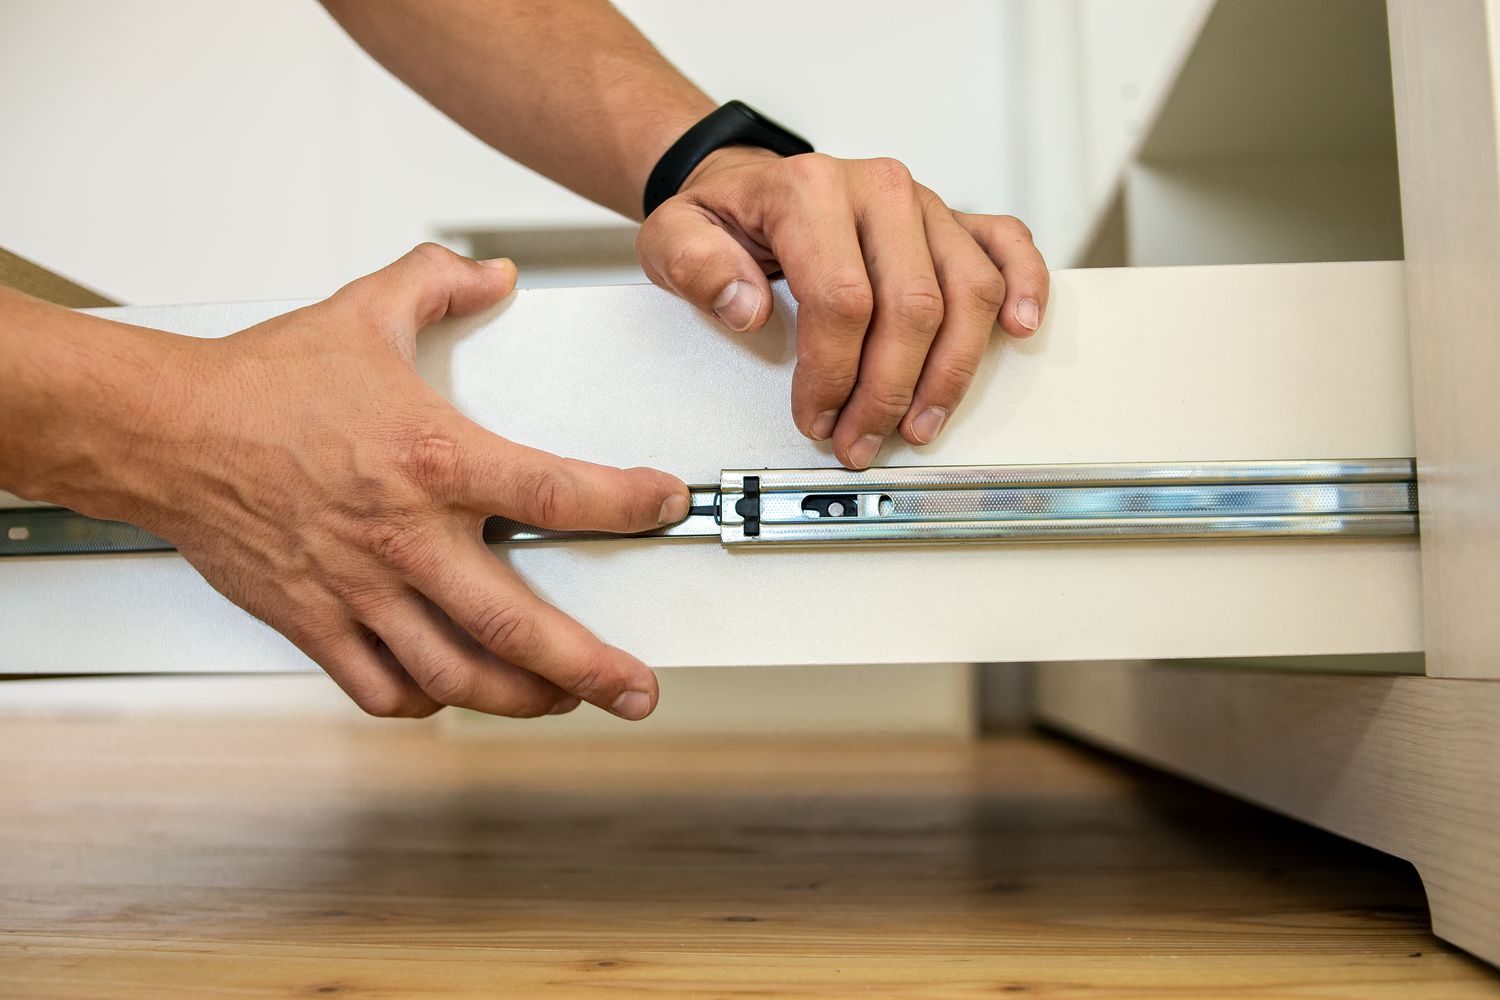 How To Open A Dresser Drawer That Is Stuck